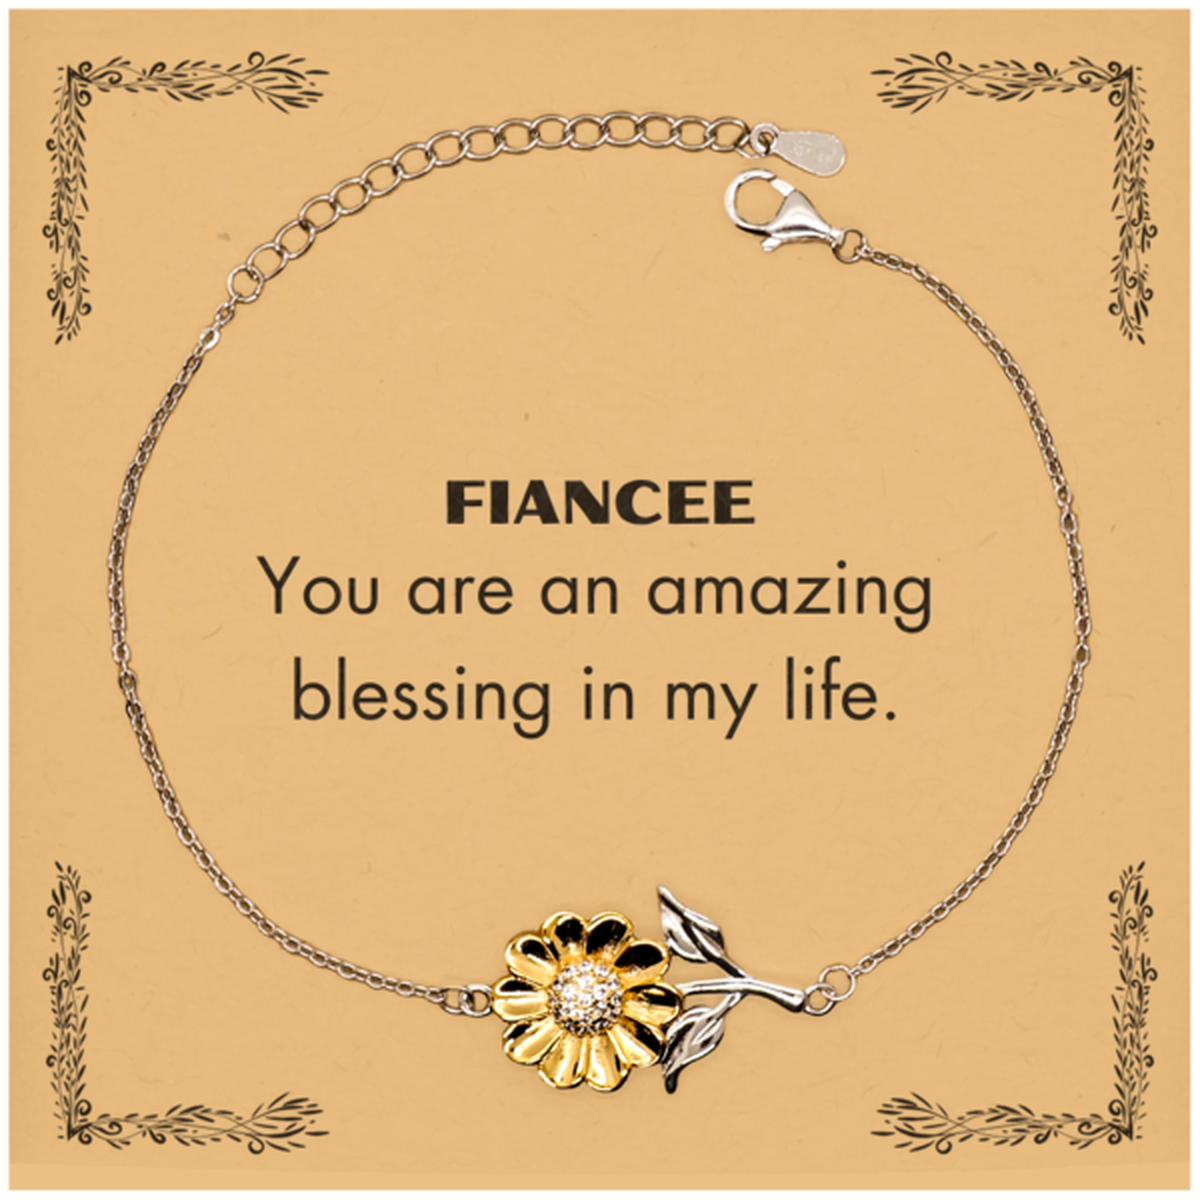 Fiancee Sunflower Bracelet, You are an amazing blessing in my life, Thank You Gifts For Fiancee, Inspirational Birthday Christmas Unique Gifts For Fiancee